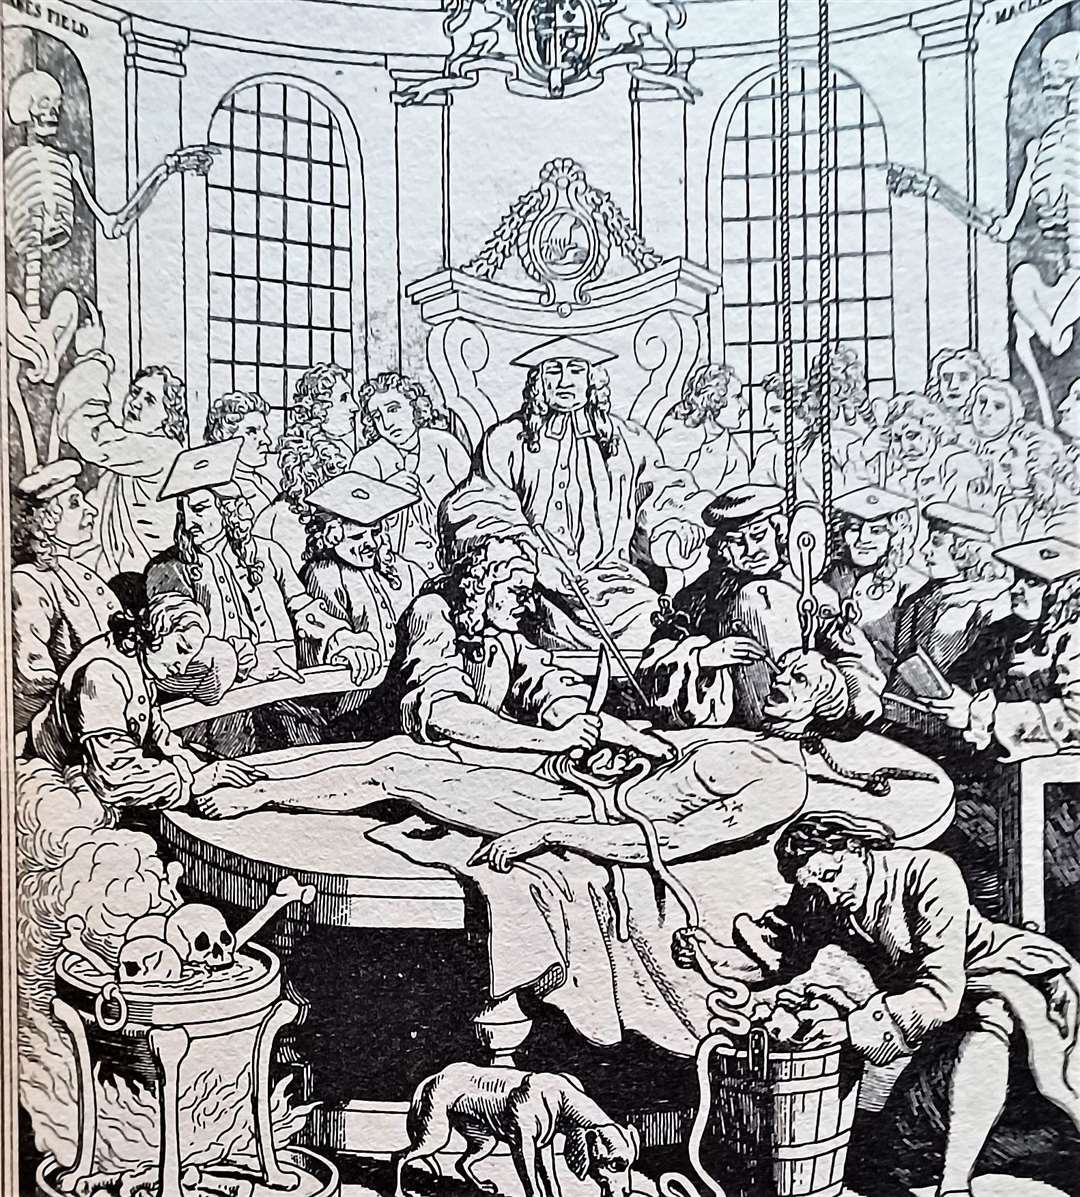 William Hogarth's illustration of an anatomy lesson in the 18th century.